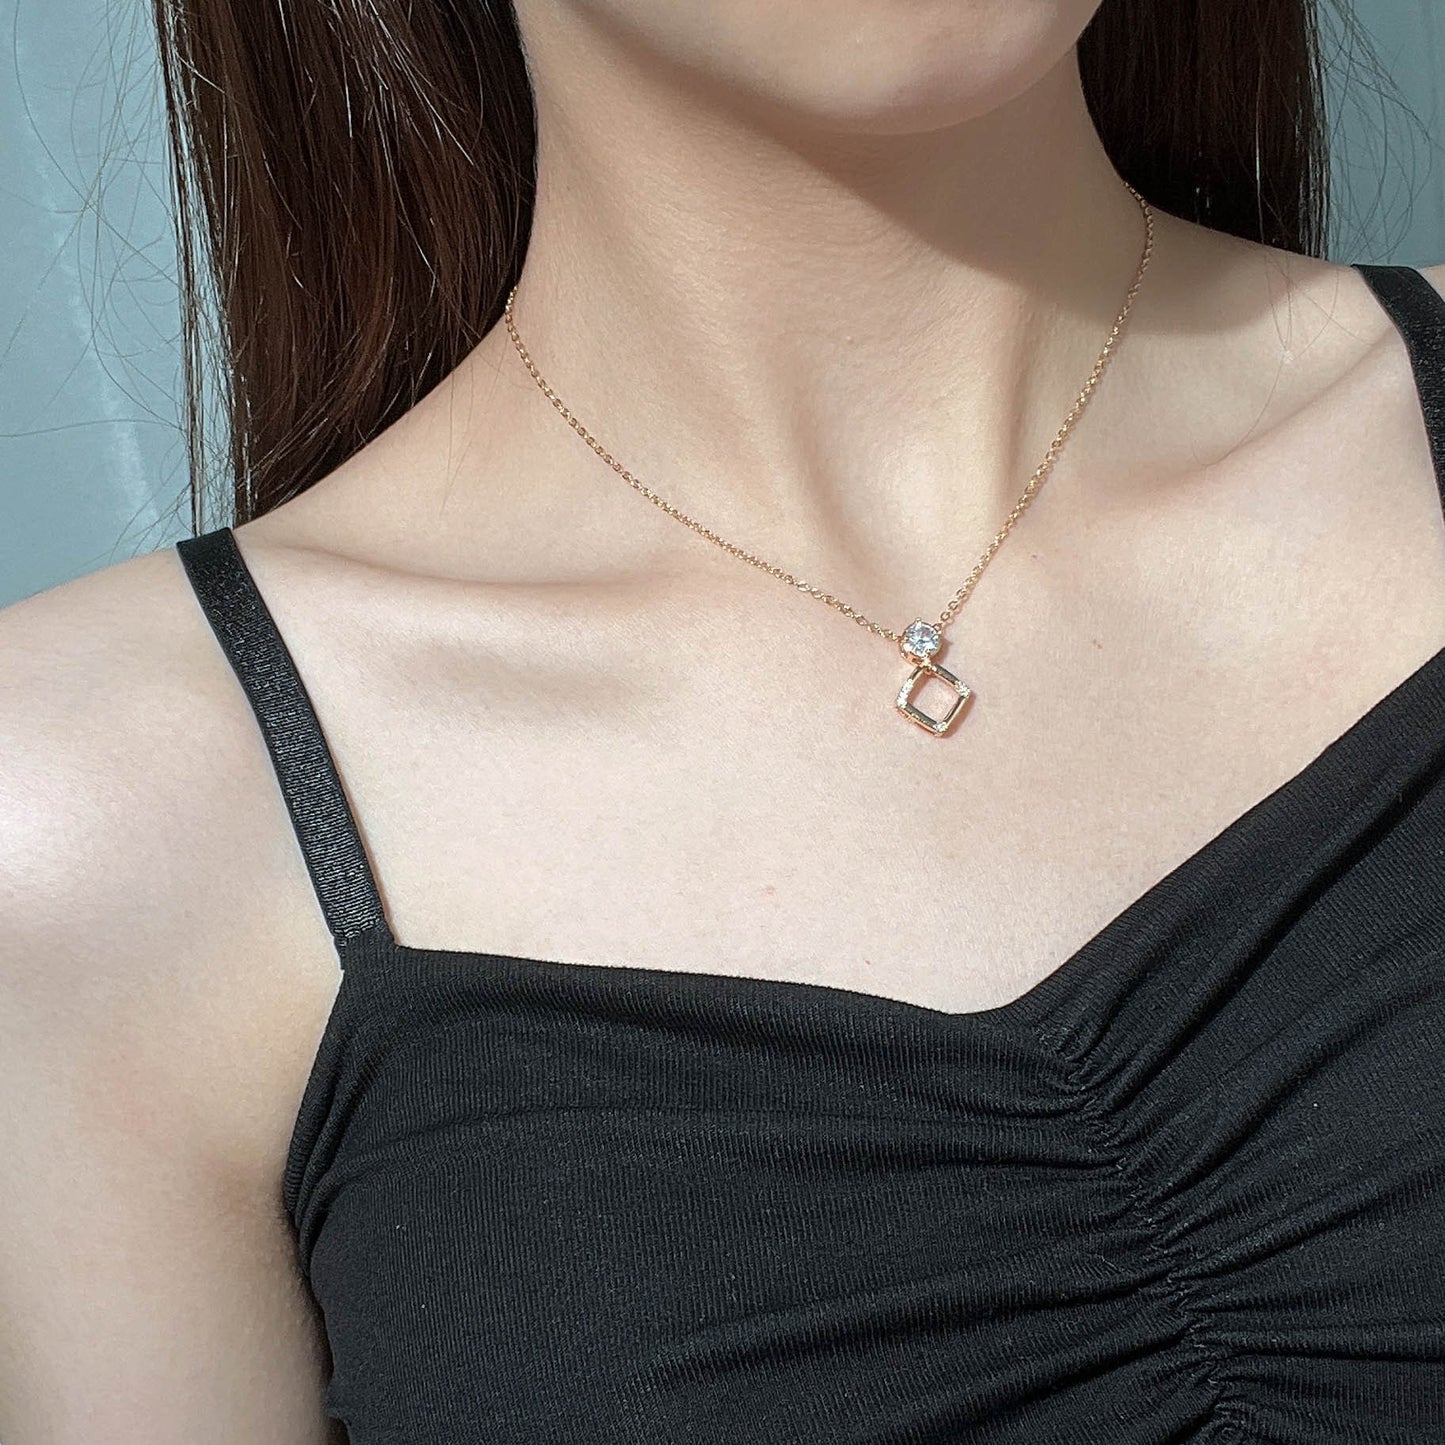 Hollow Square with Round Zircon Pendant Silver Necklace for Women